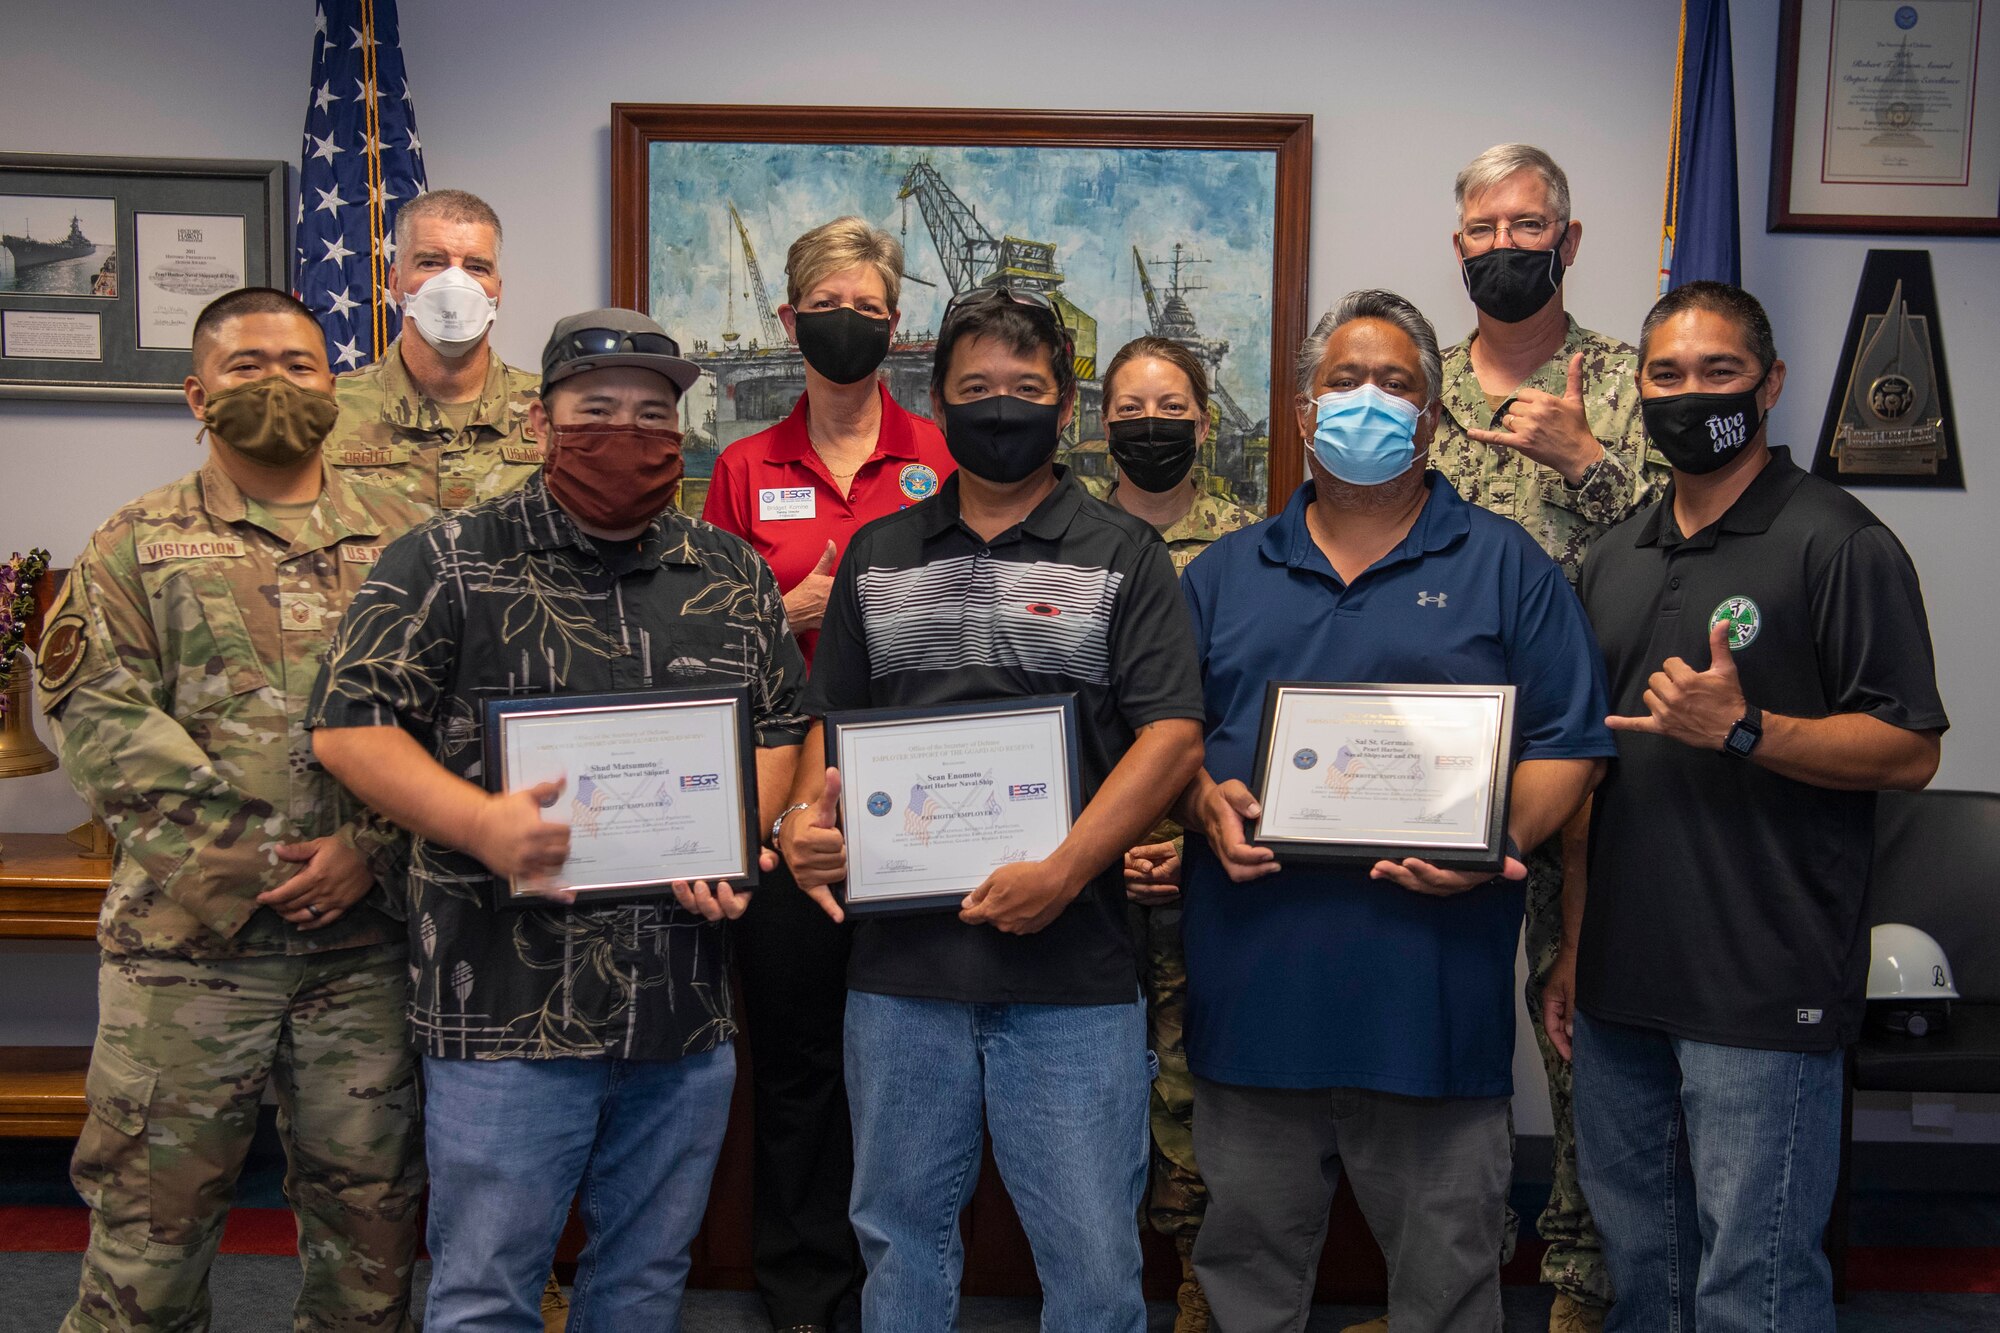 A group of people, civilian and military, standing together with certificates of appreciation.